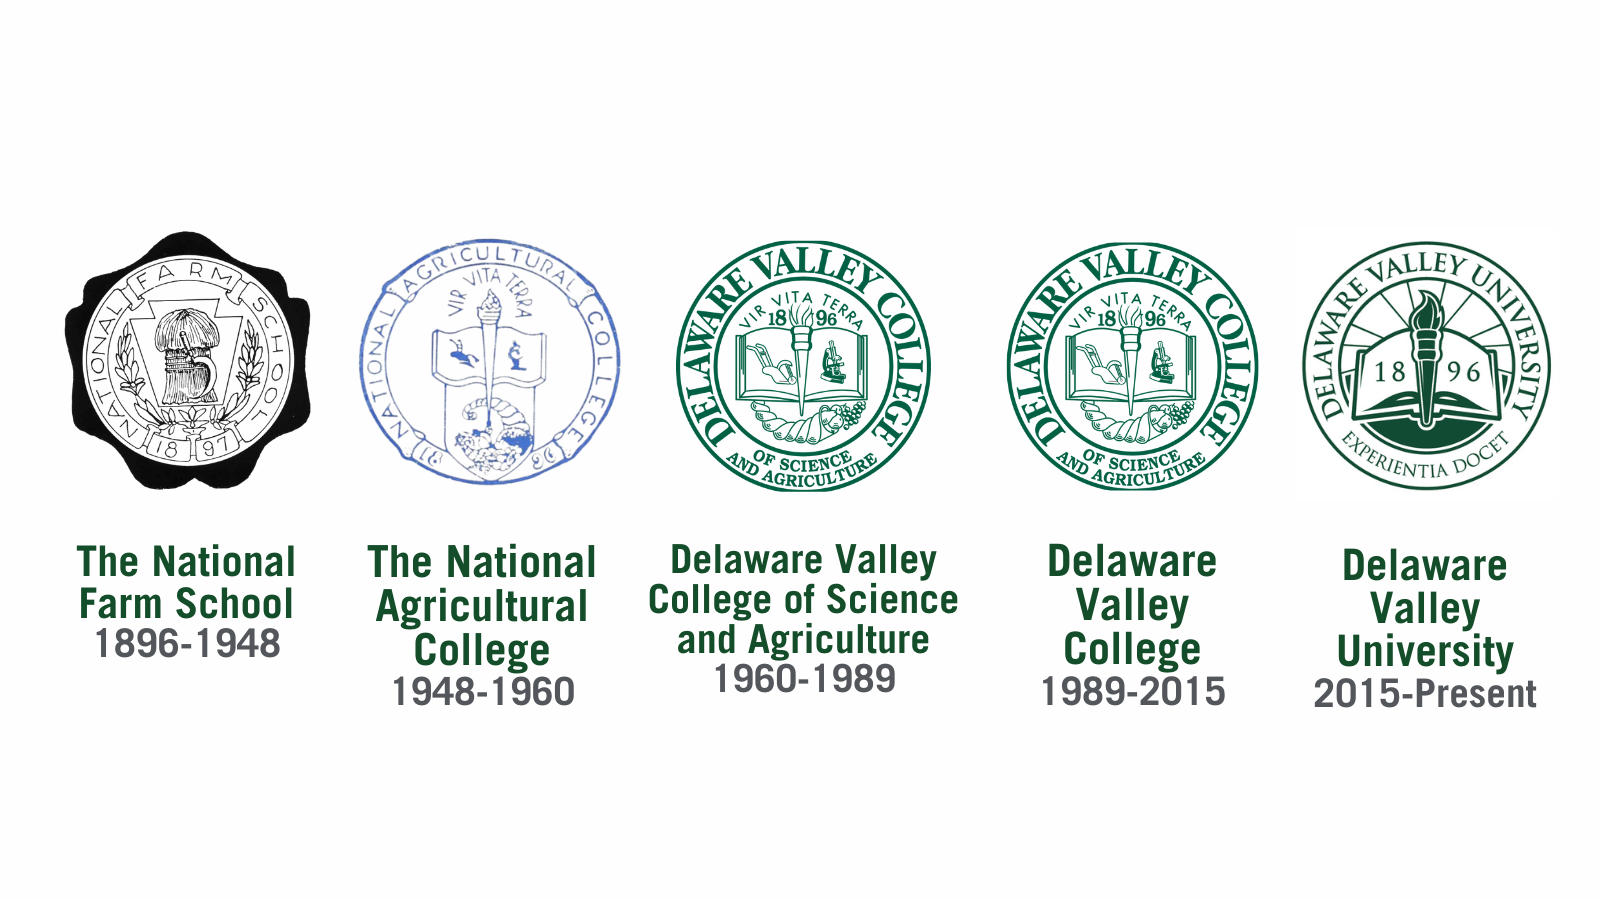 A timeline of DelVal's names and seals.